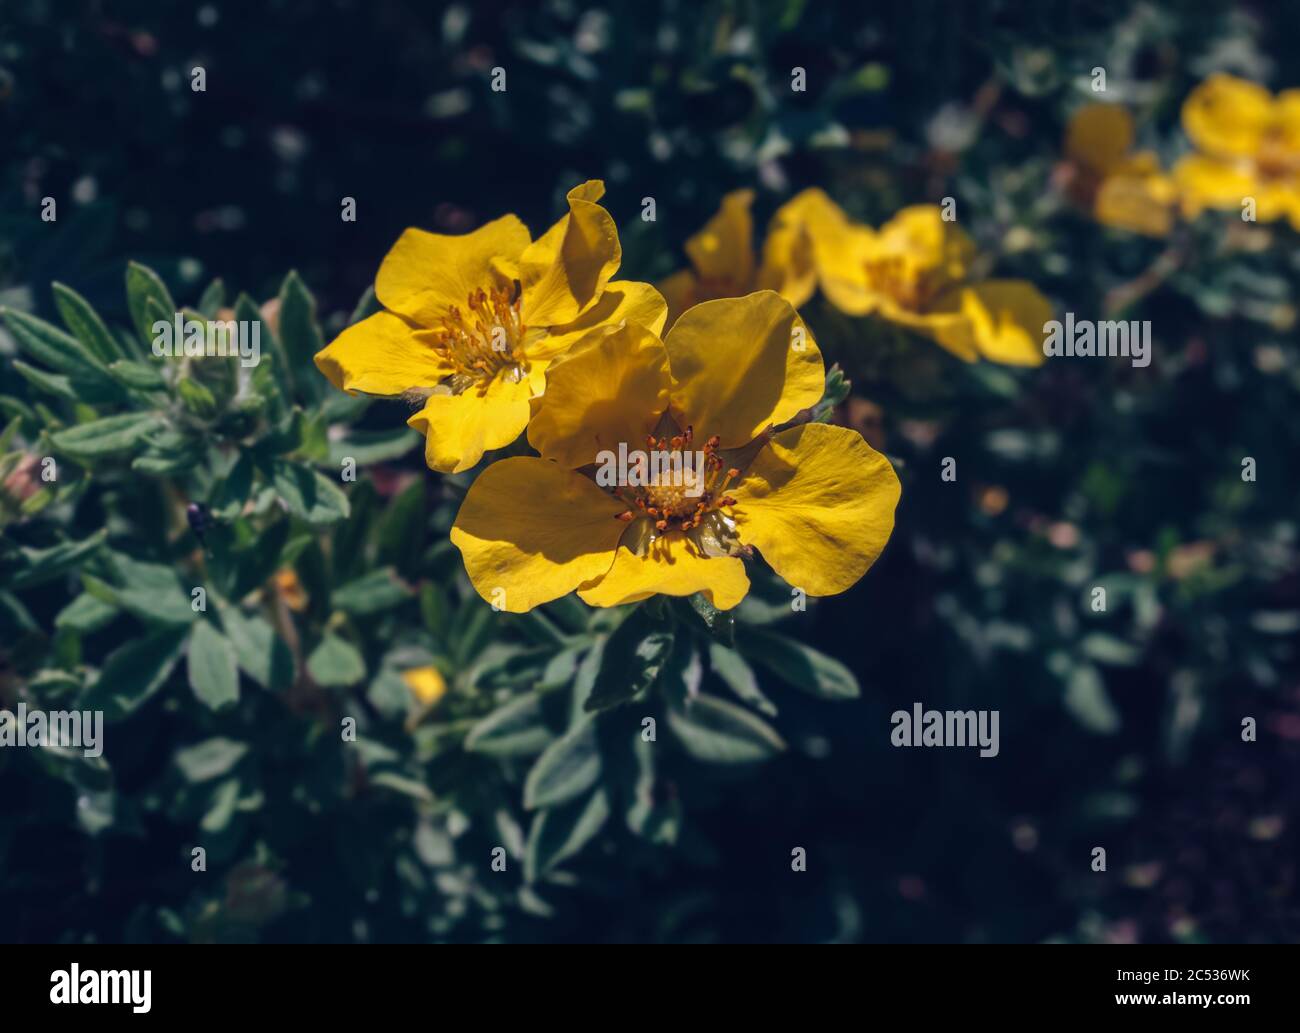 close up view of blooming yellow cinquefoil  flowers with dark green background Stock Photo